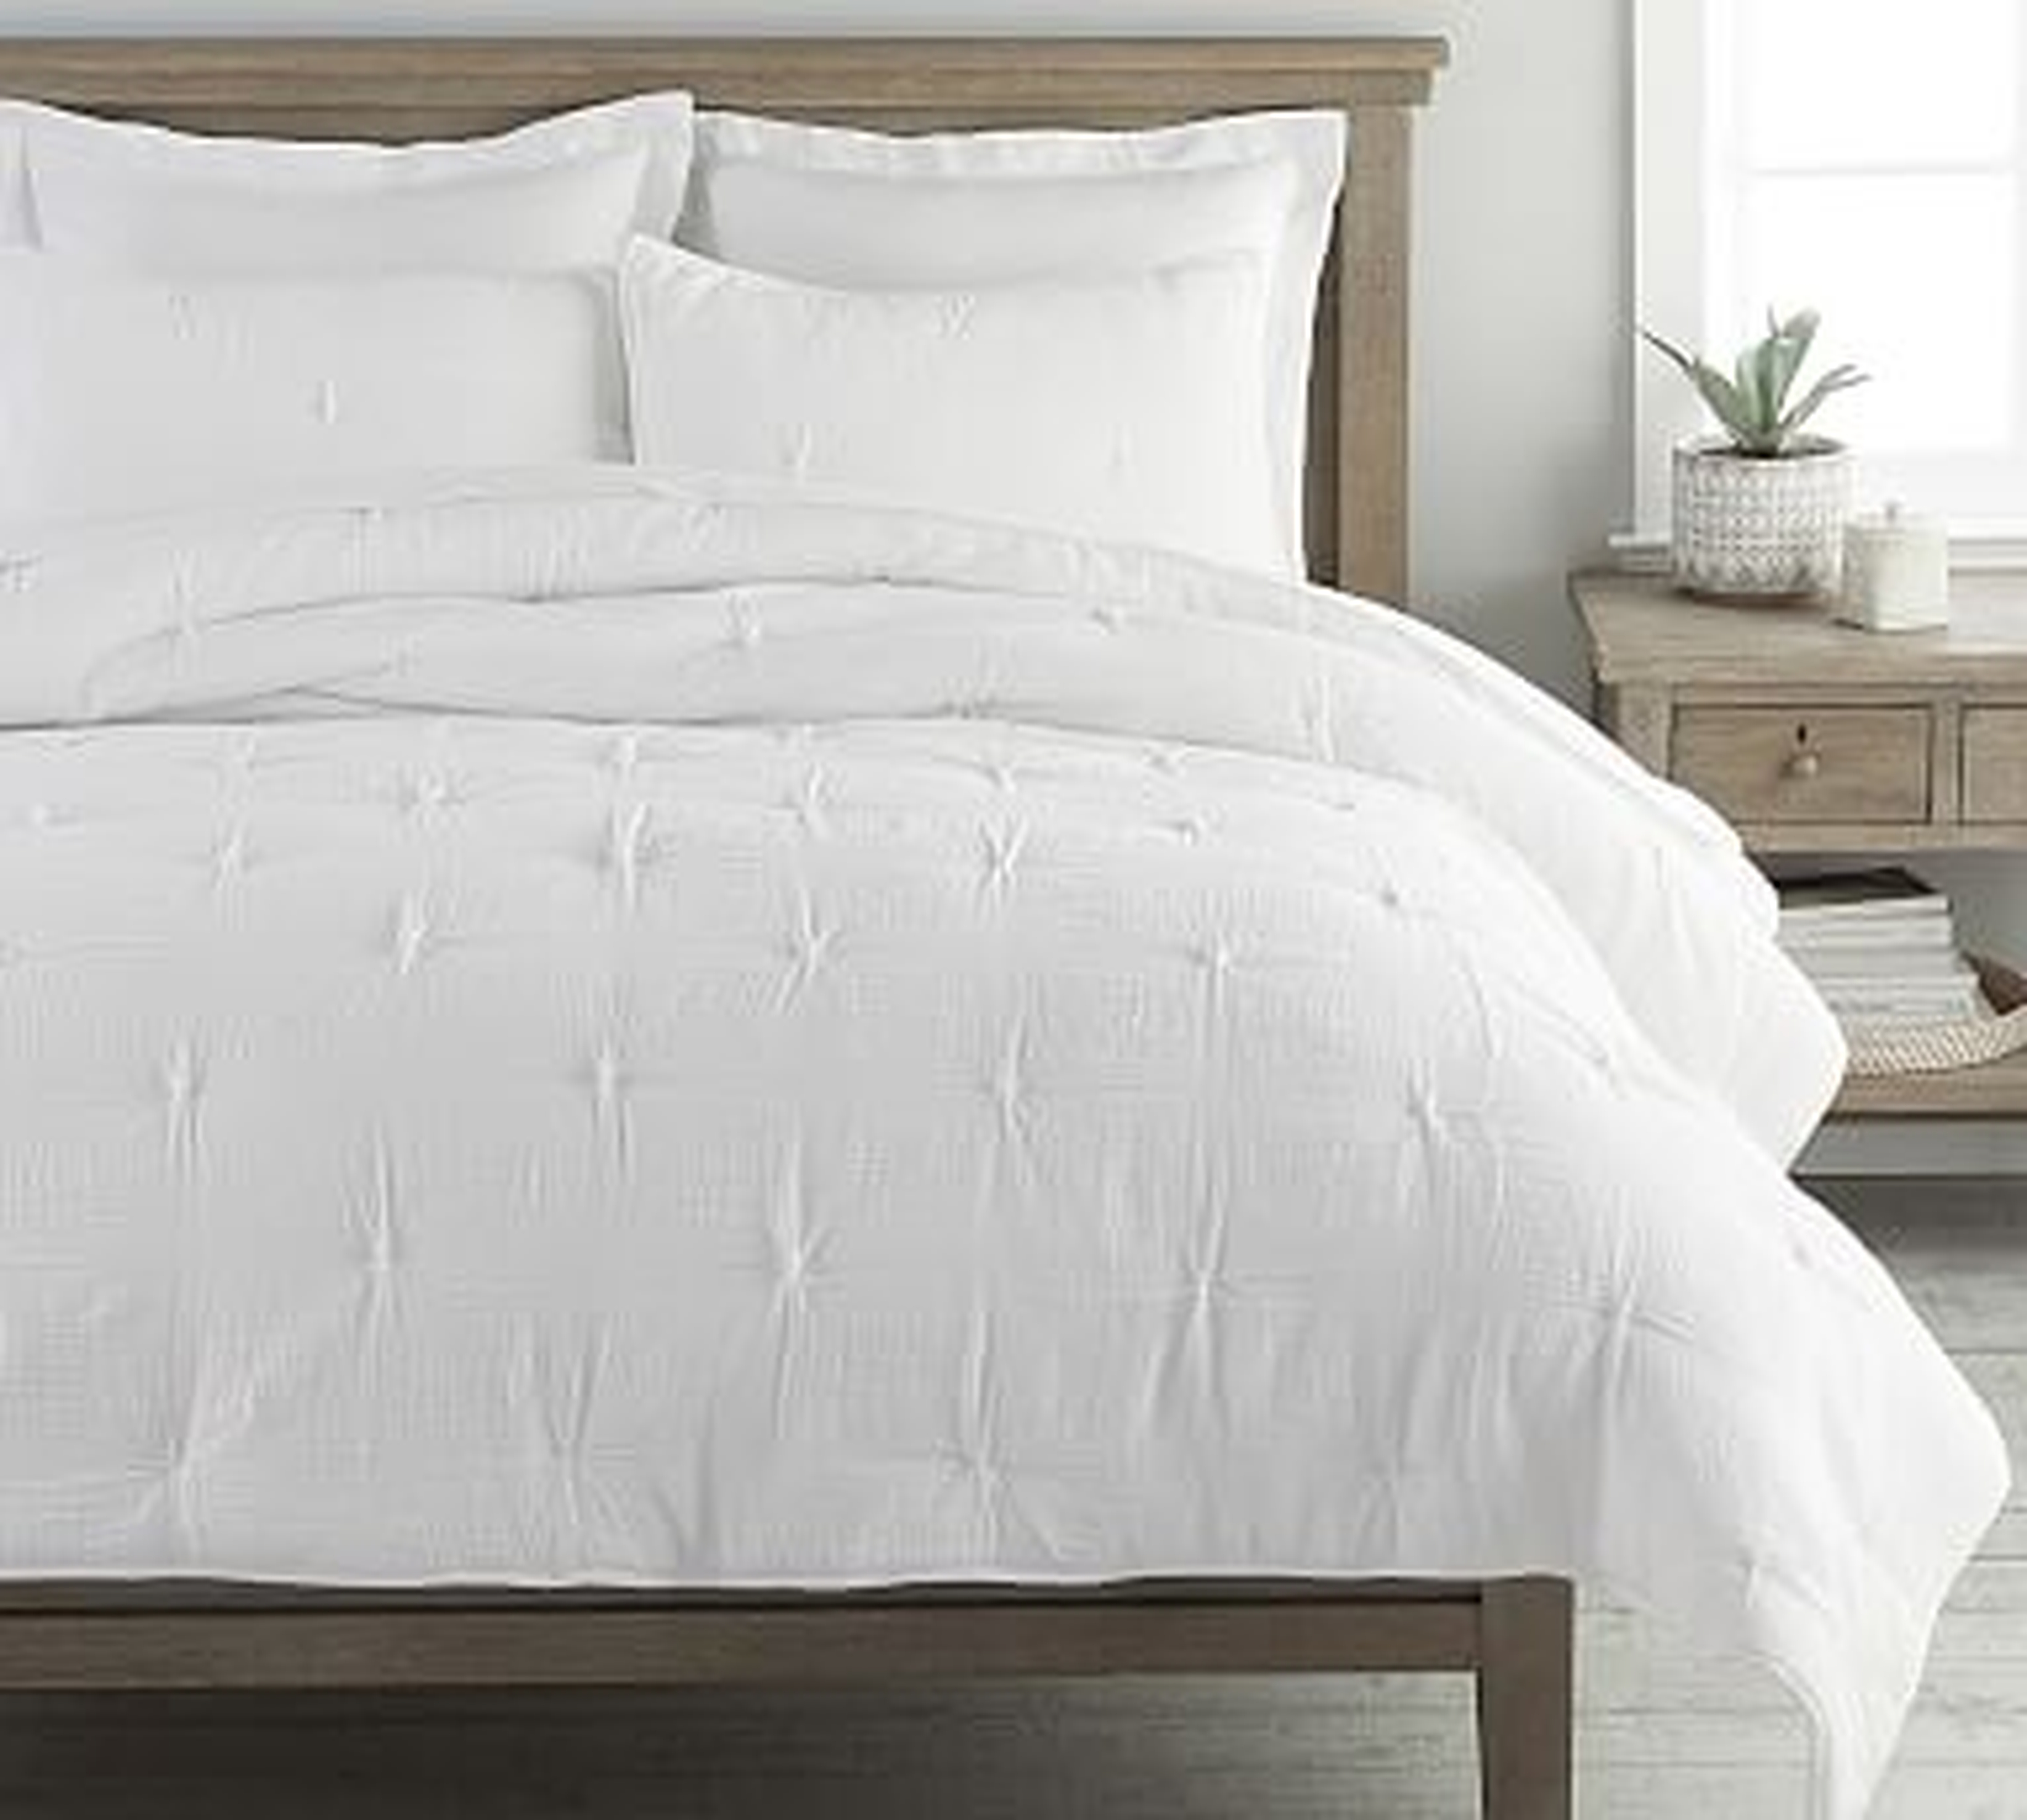 Soft Cotton Handcrafted Quilt, Full/Queen, White - Pottery Barn